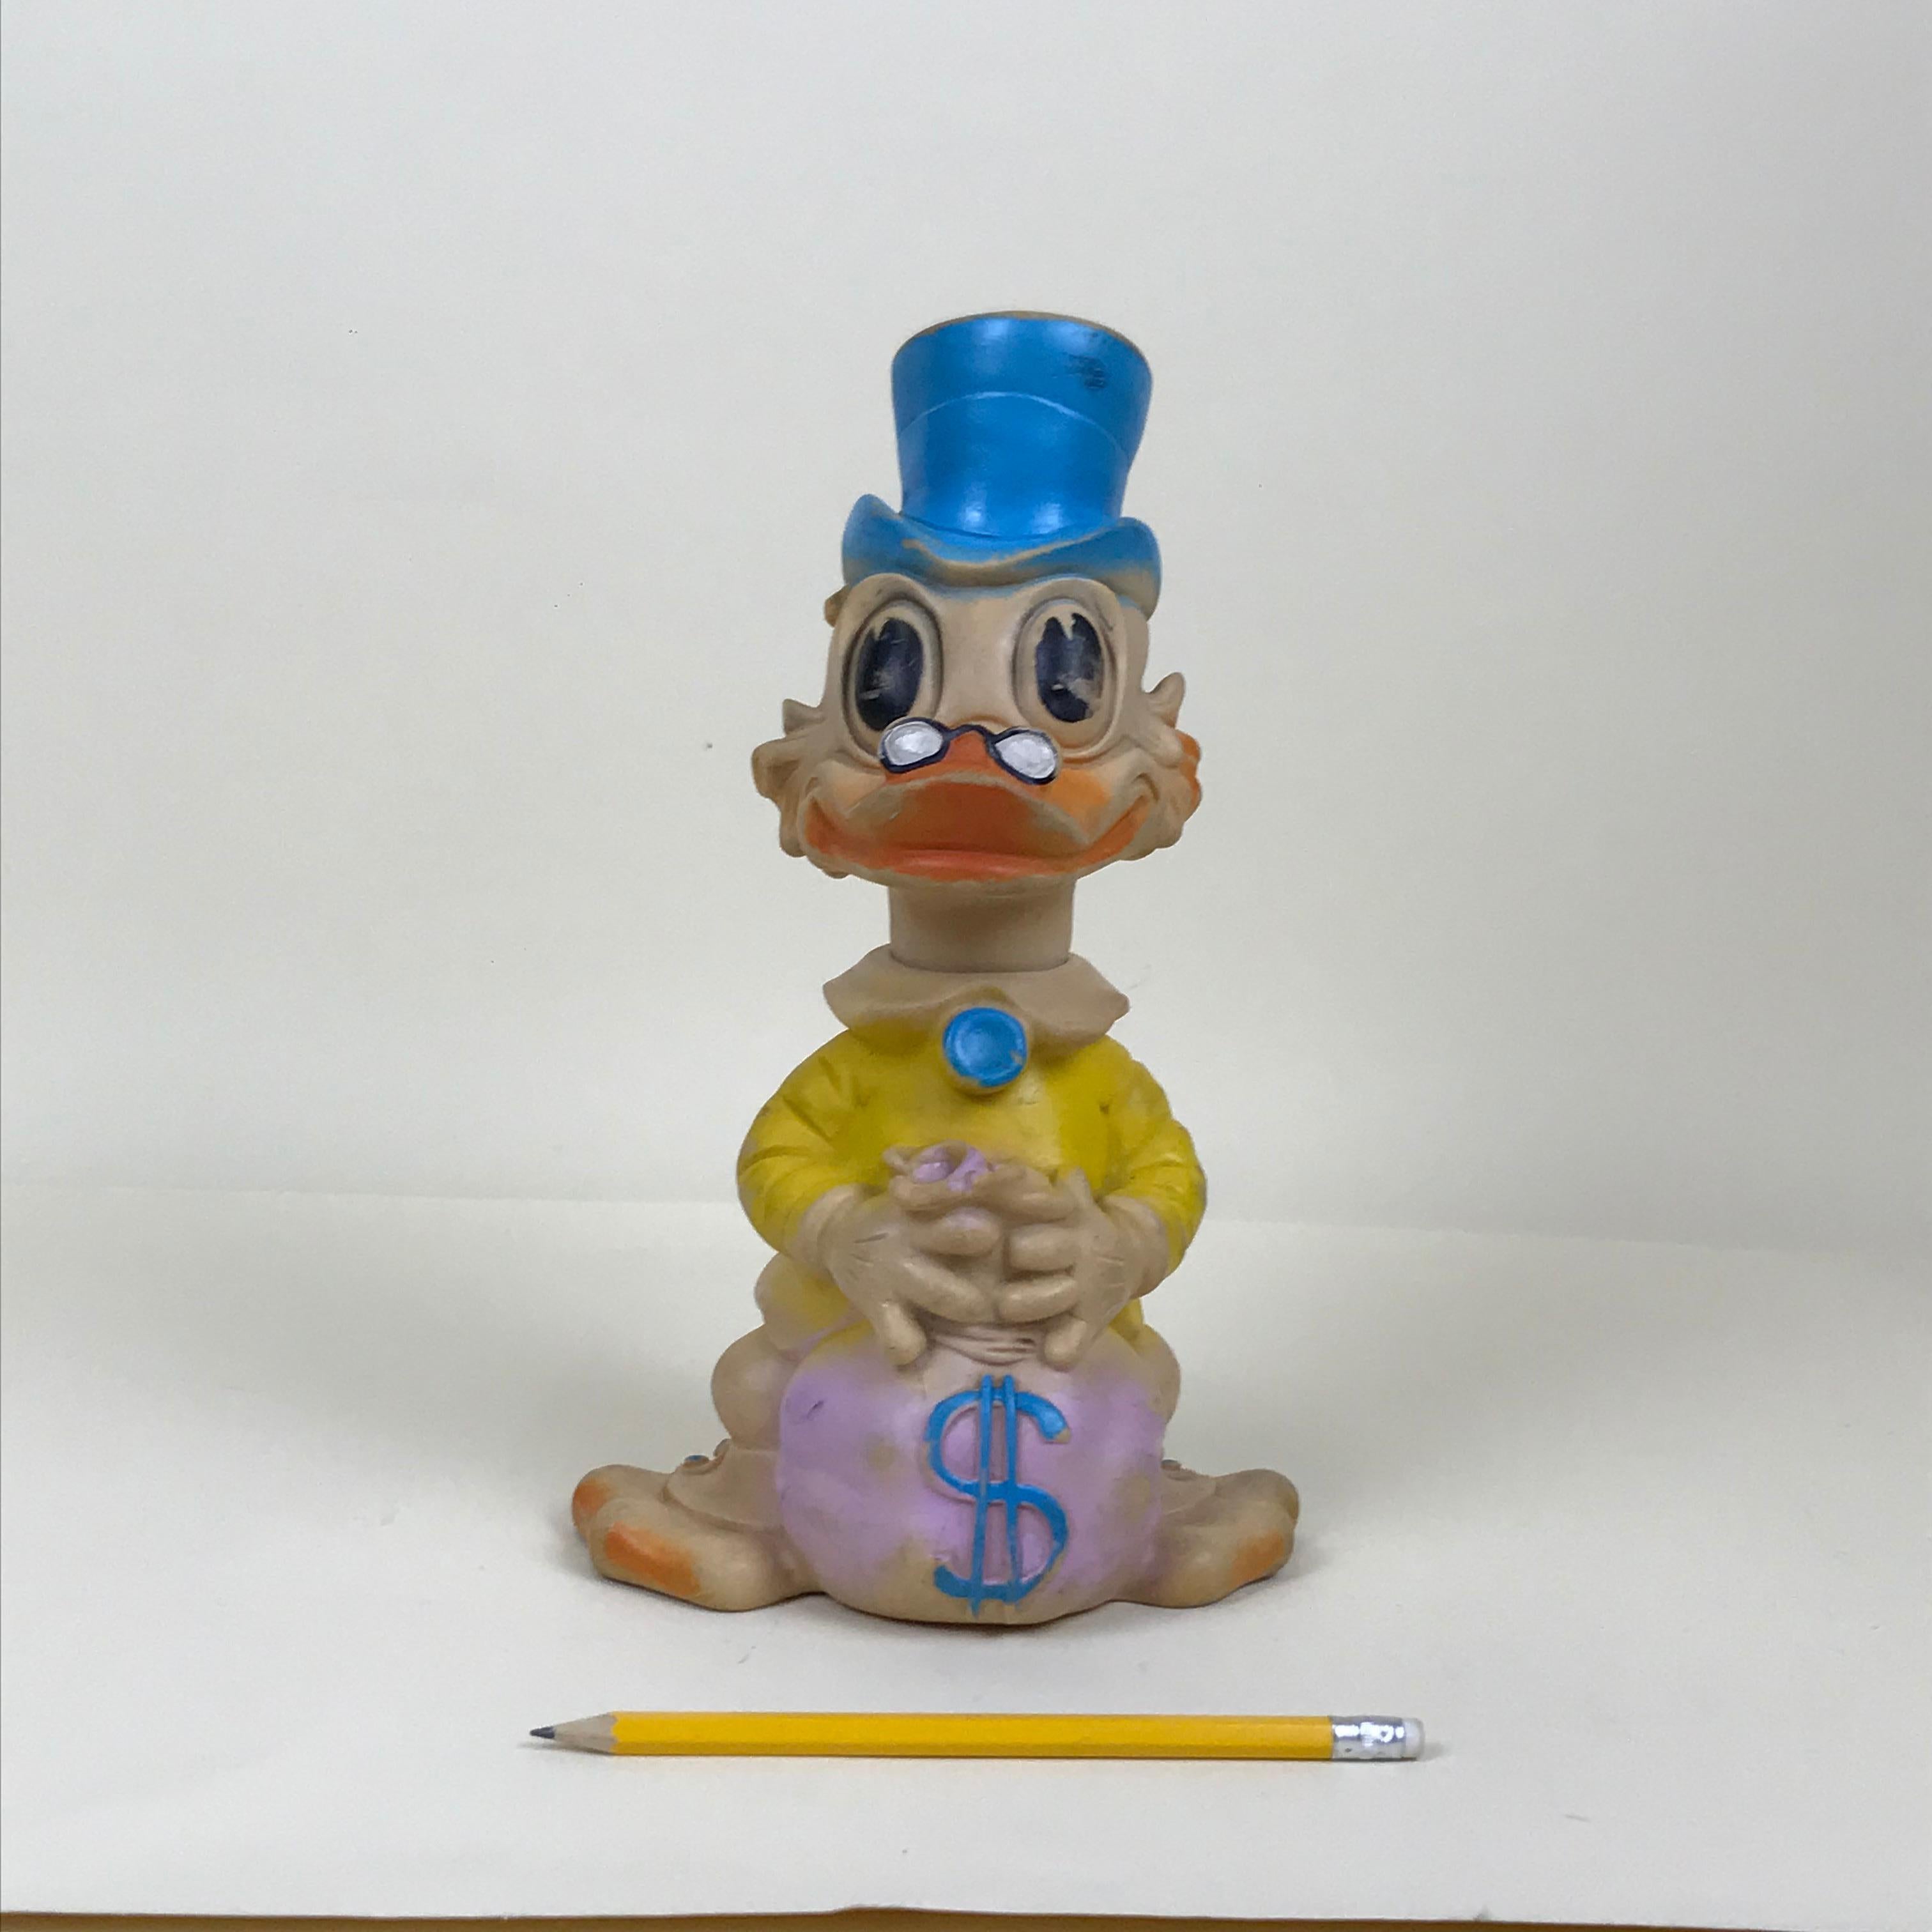 Very rare vintage yellow Uncle Scrooge squeak rubber toy with bag of coins made by Biserka in ex Yugoslavia now Croatia in the 1960s.

This model is one of the six different color model originally produced.

Marked 